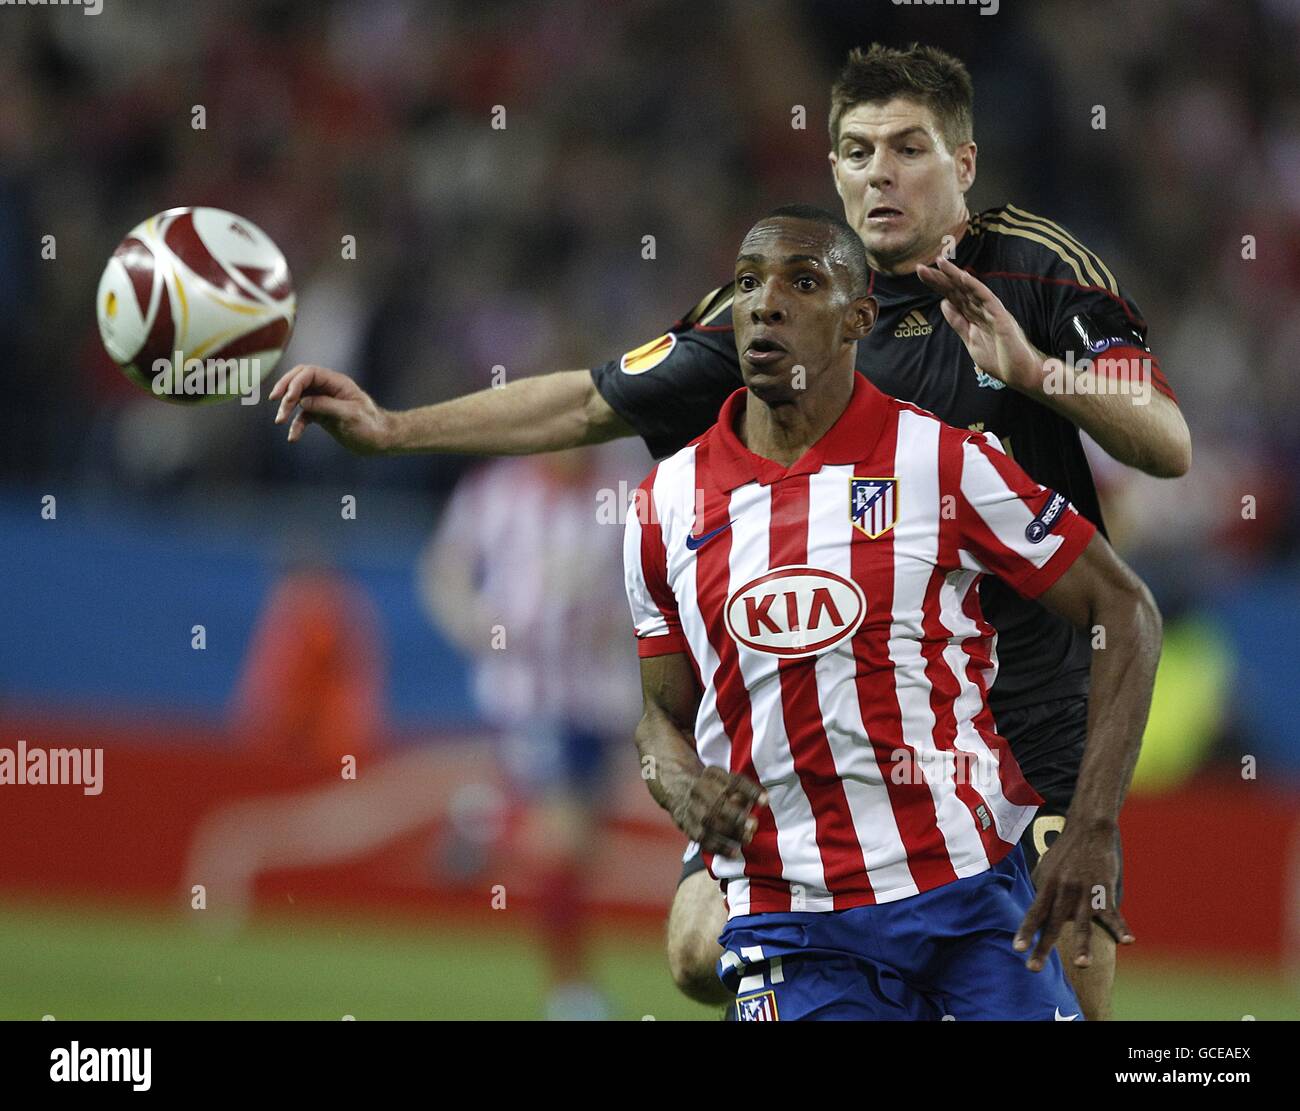 Atletico Madrid's Luis Amaranto Perea (left) and Liverpool's Steven Gerrard (right) in action Stock Photo